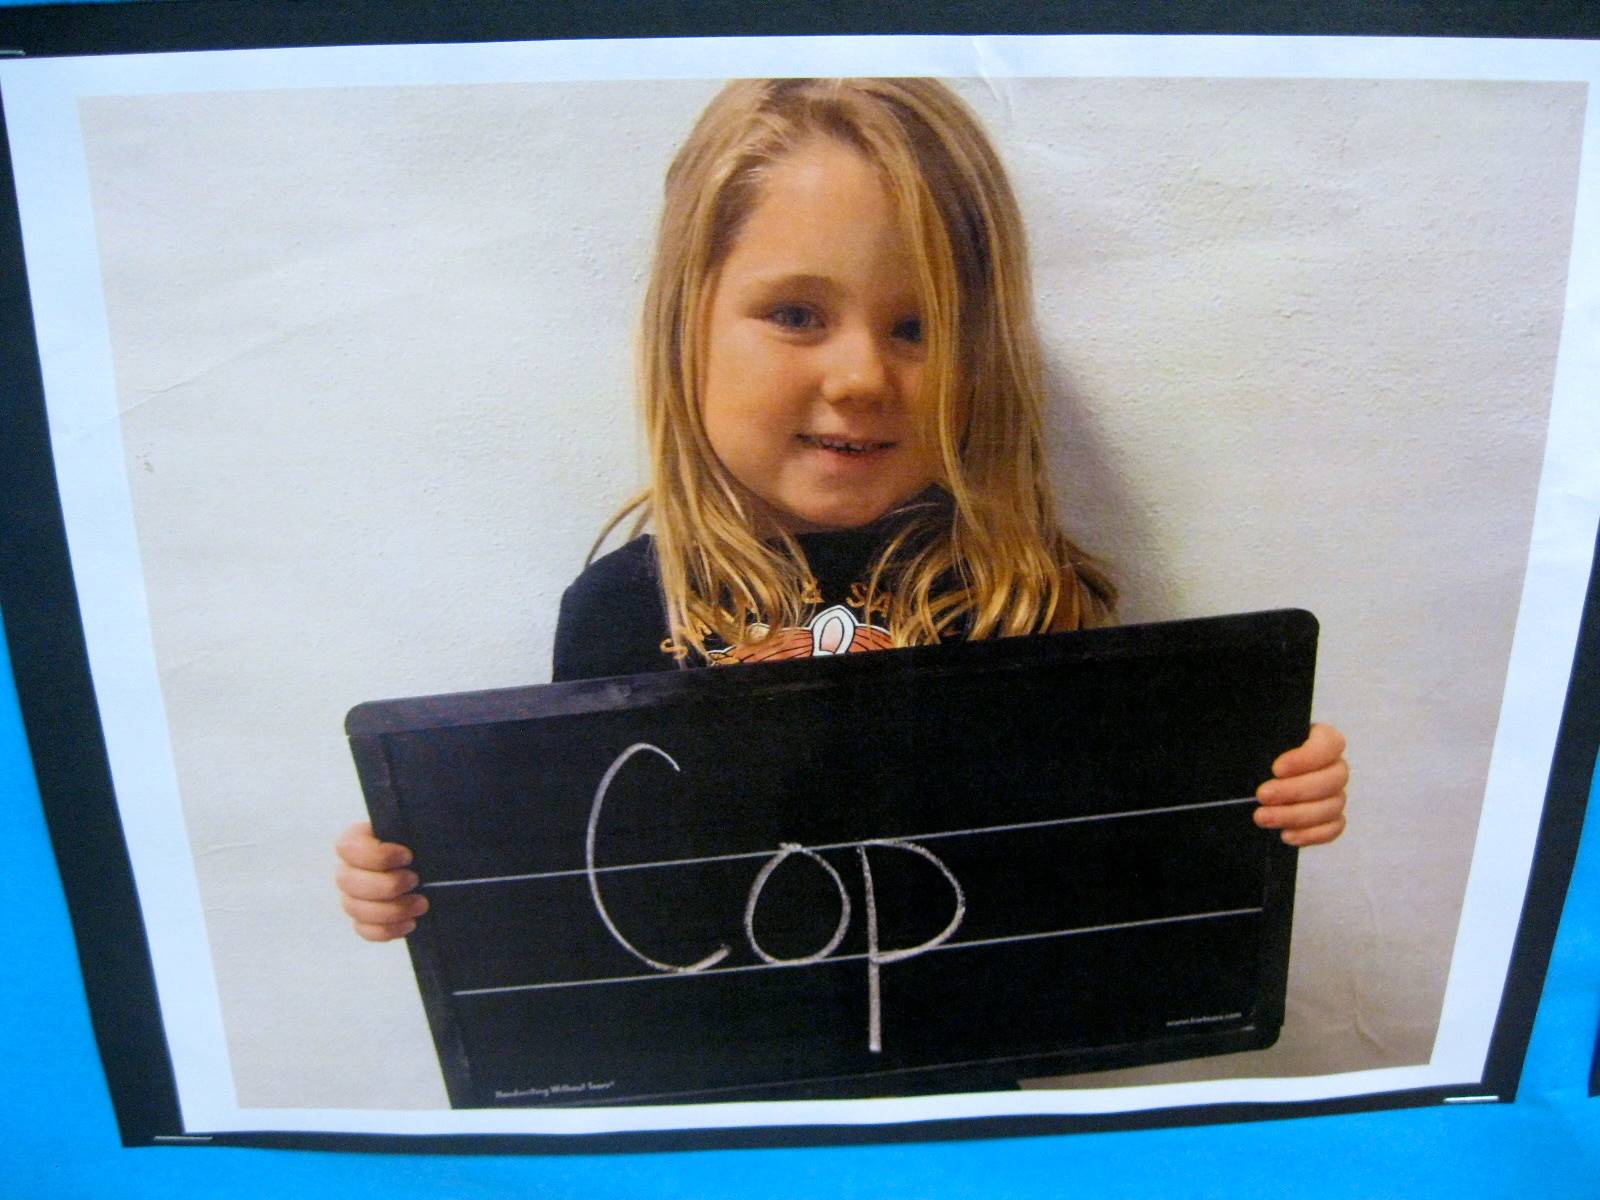 Child holding sign to show what they want to be when they grow up.